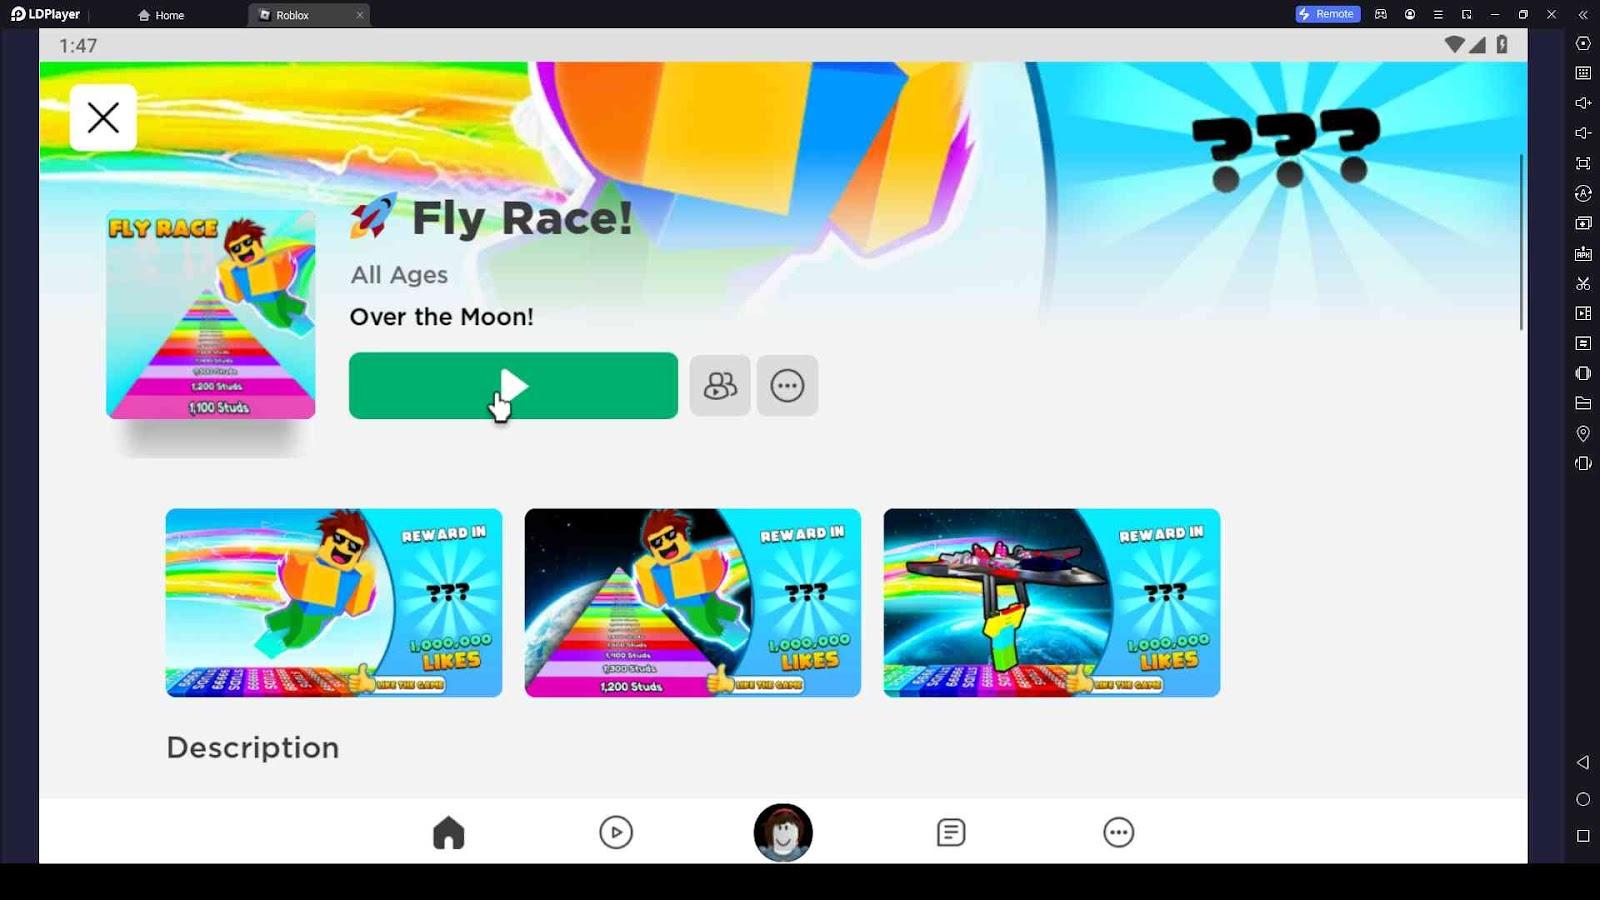 Redeem these Fly Race codes to get free Studs